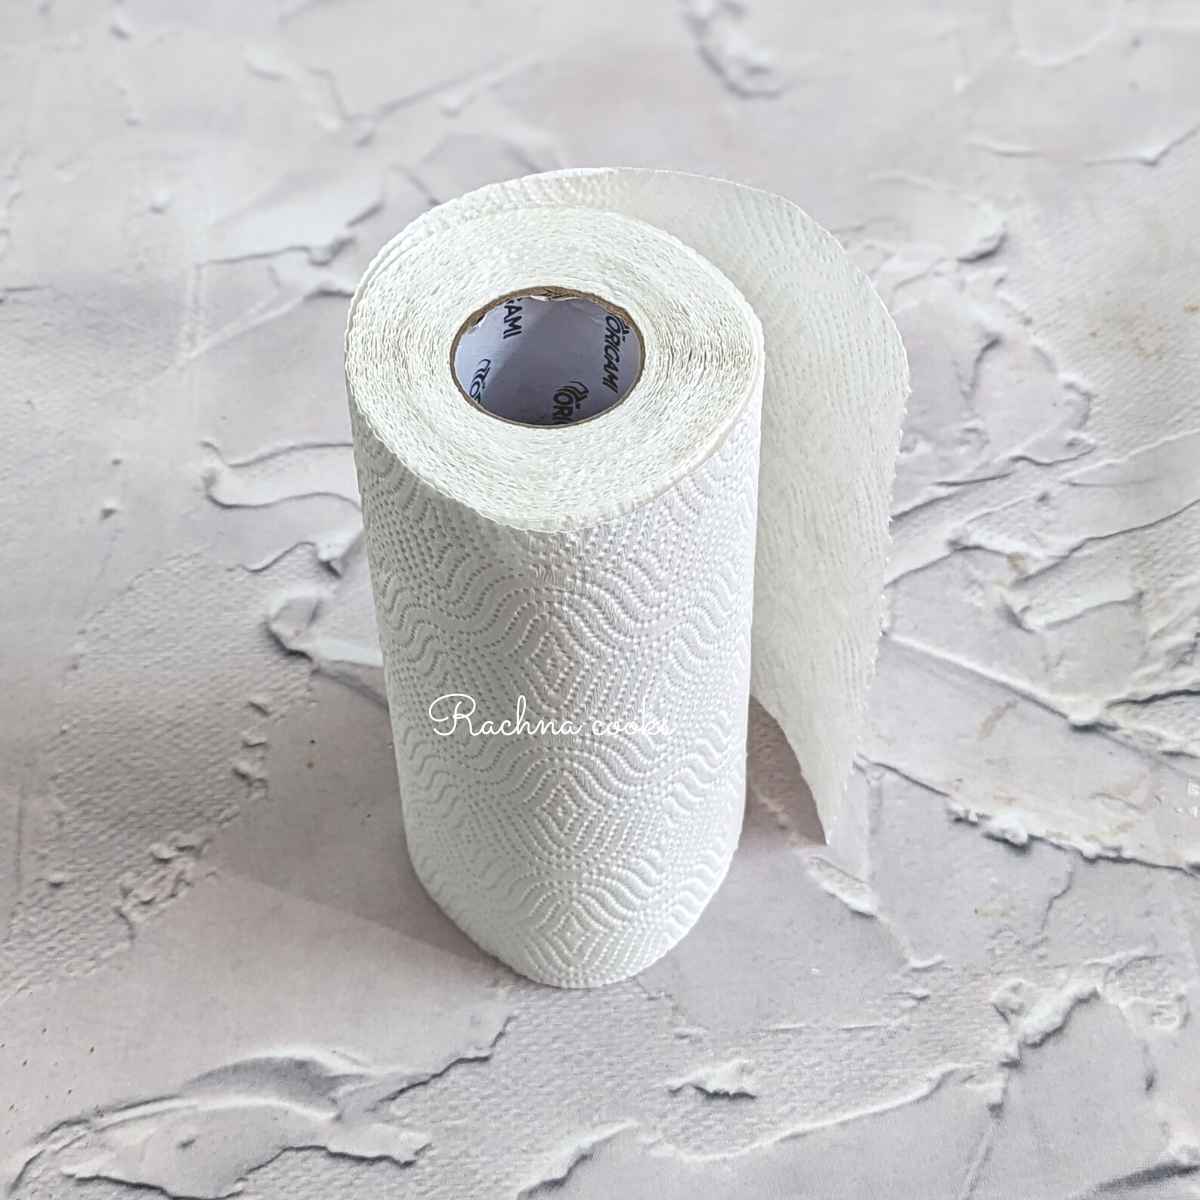 Paper towel roll on a surface